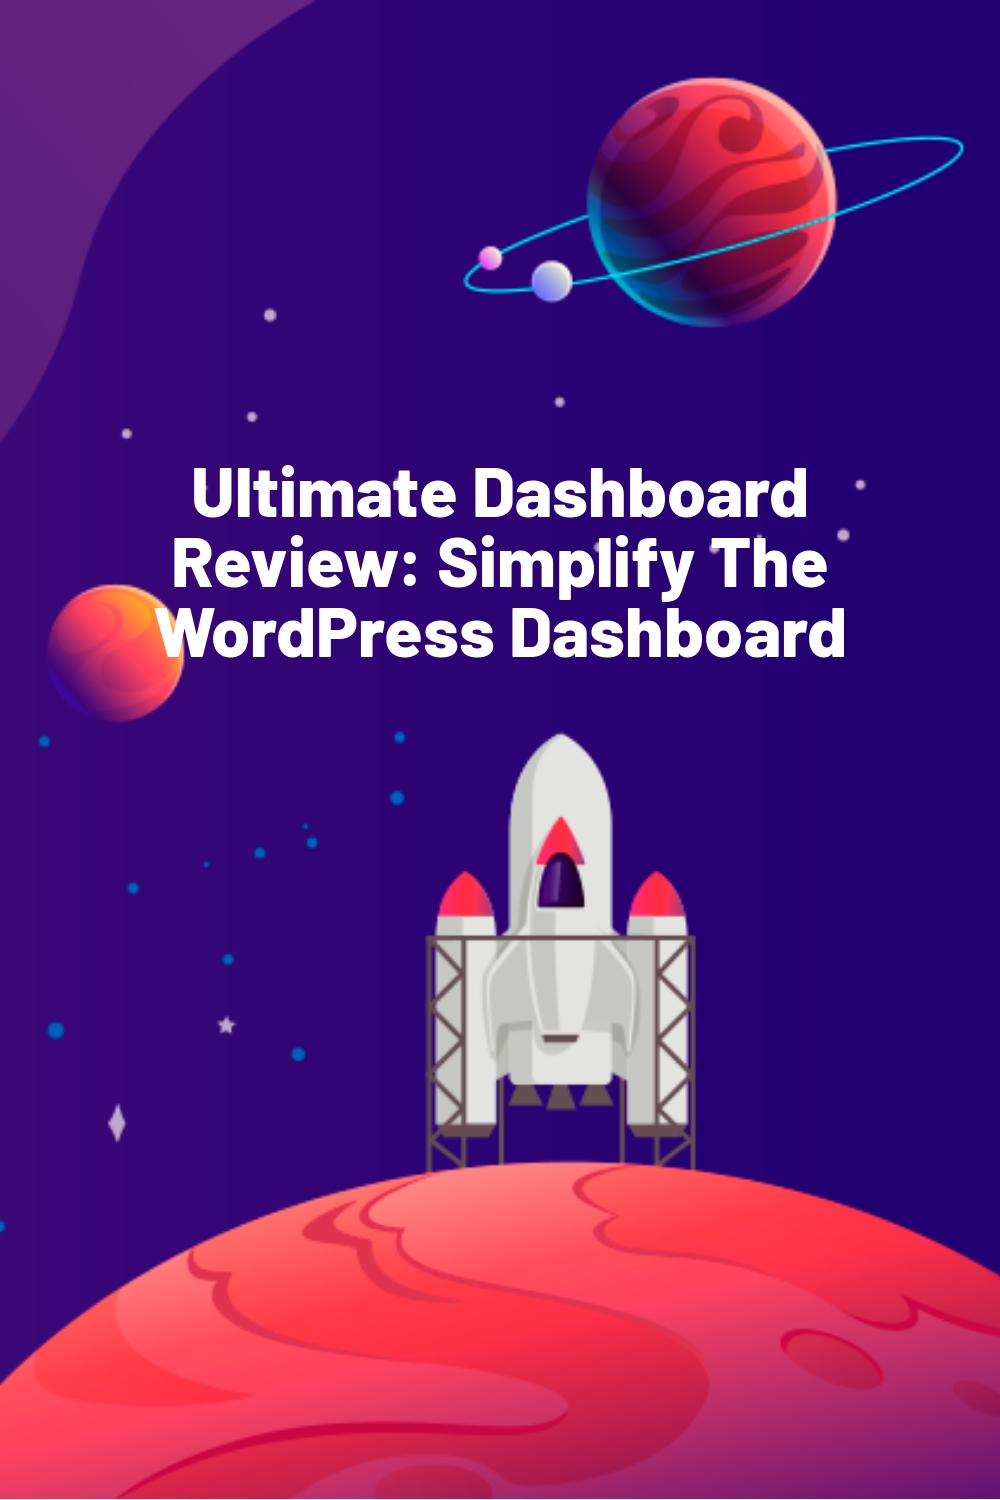 Ultimate Dashboard Review: Simplify The WordPress Dashboard